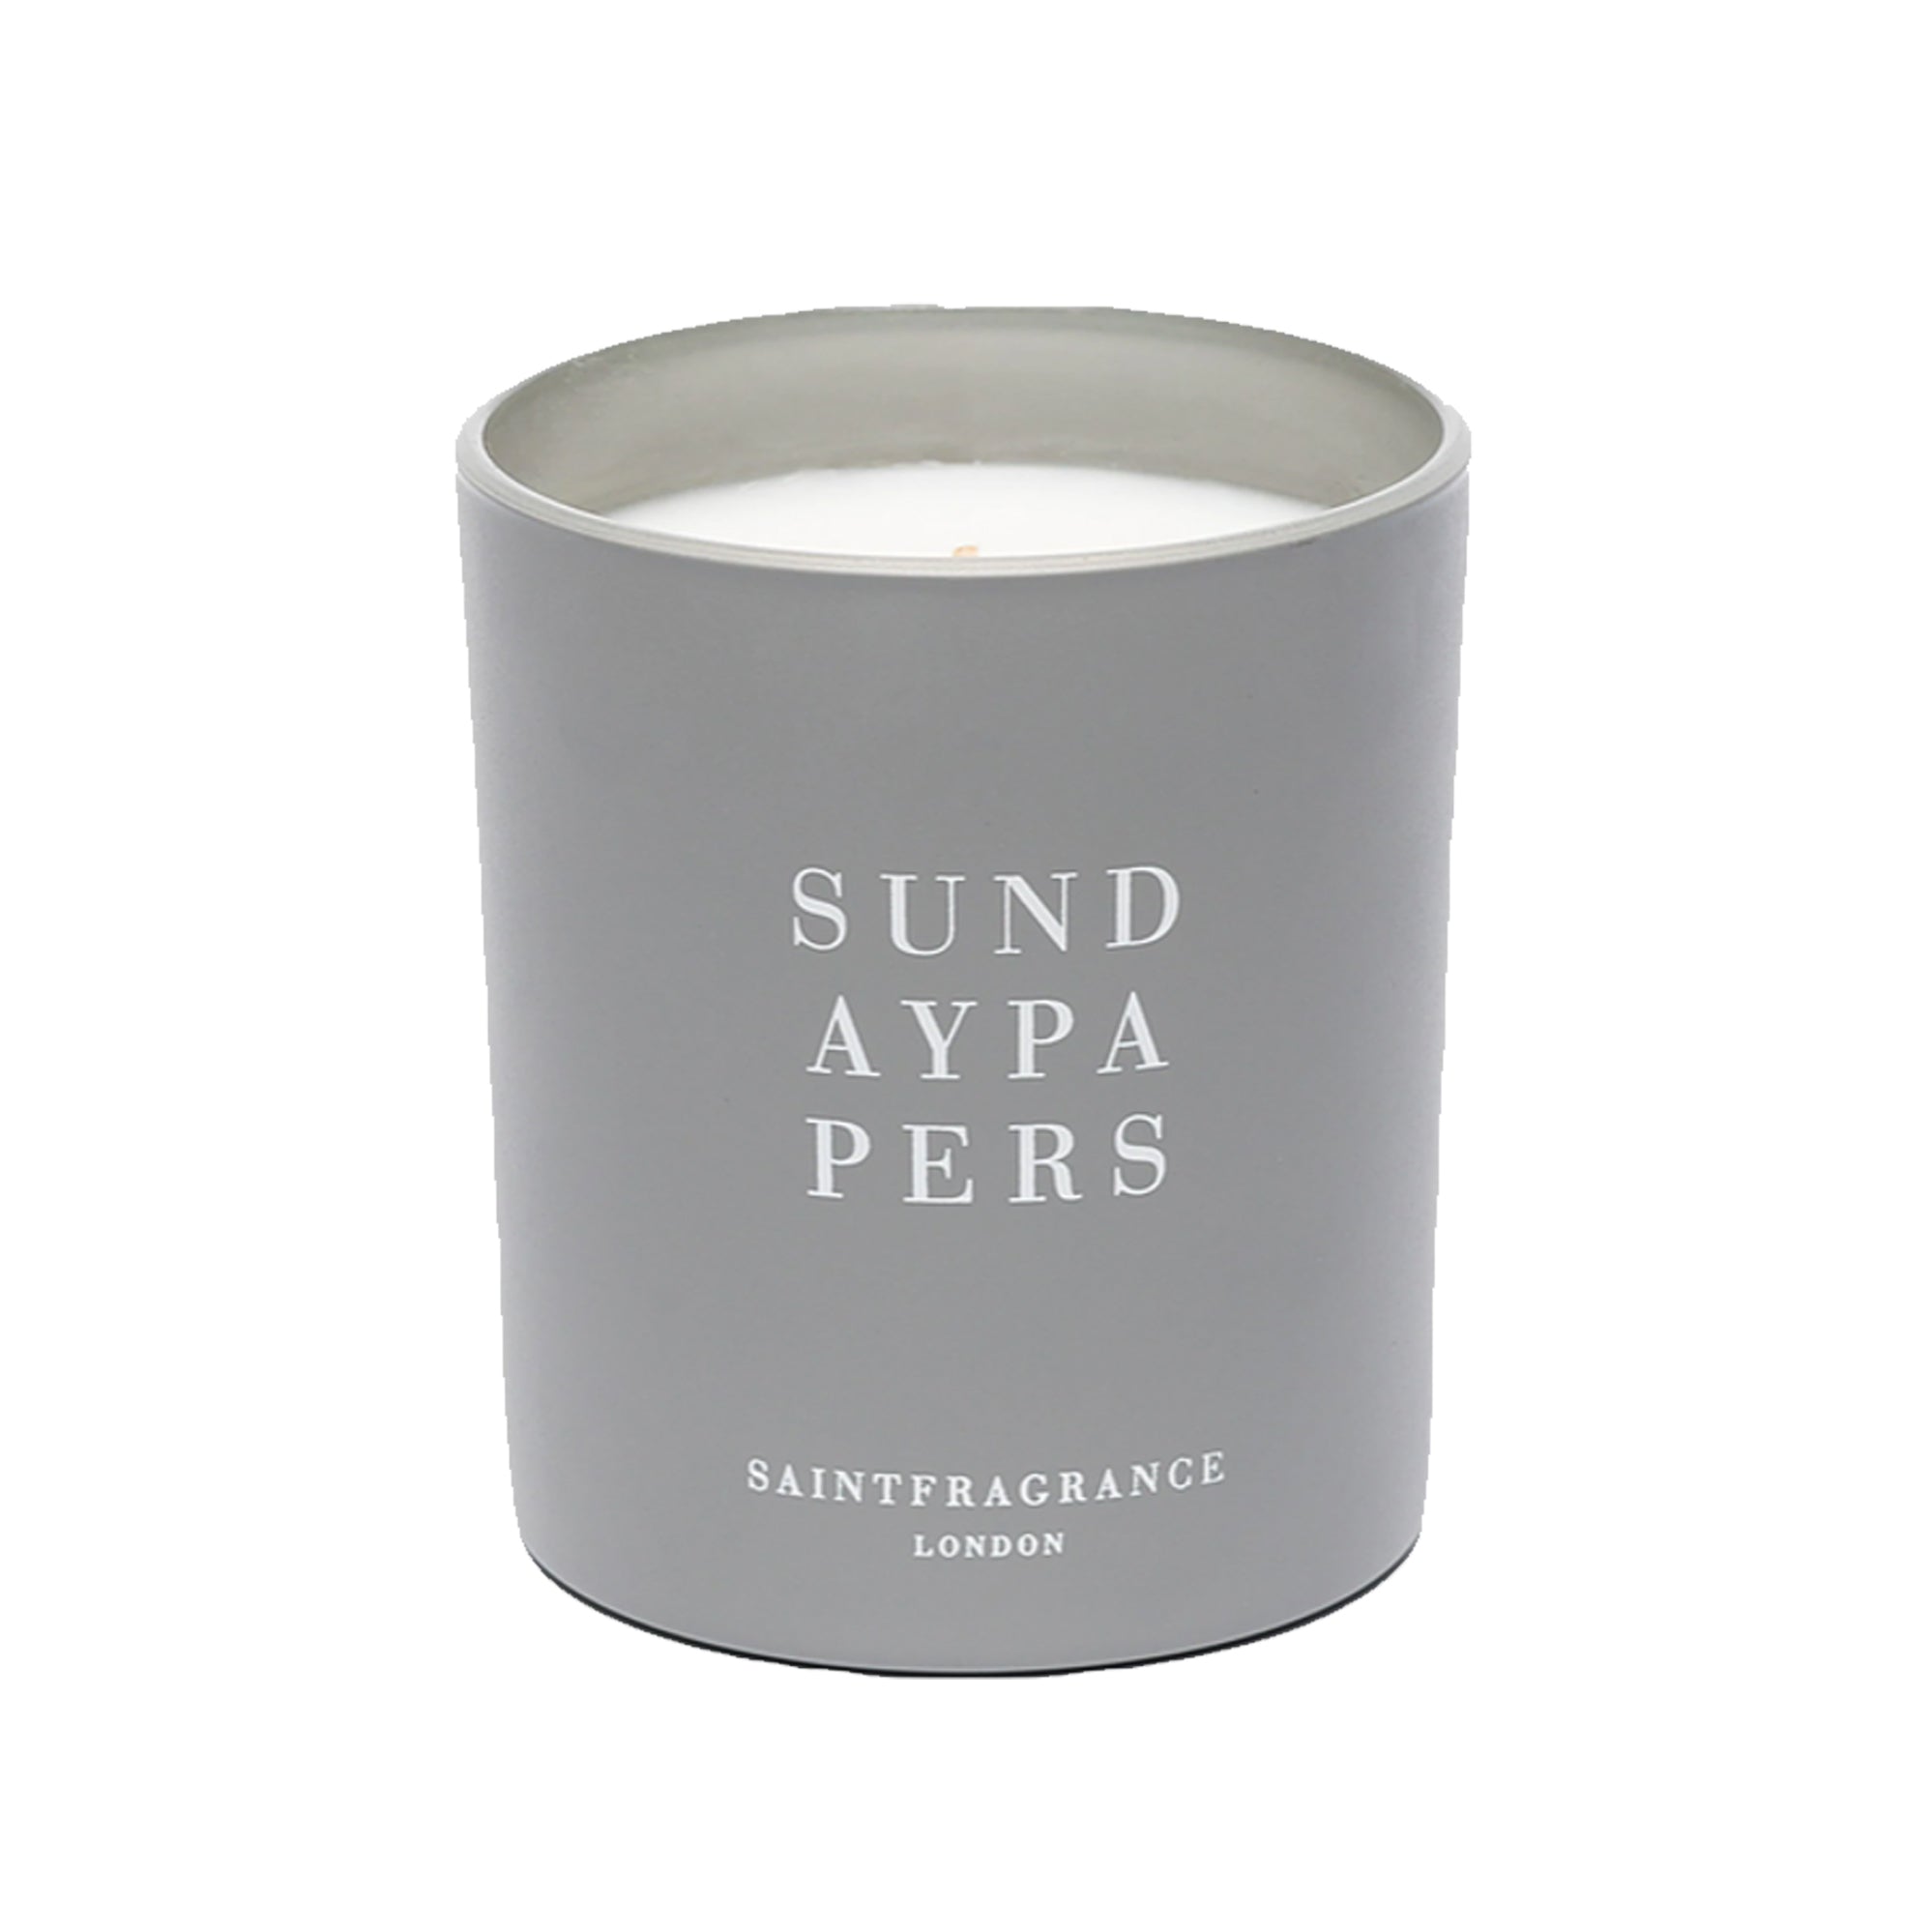 Sunday Papers 200g Scented Candle by Saint Fragrance